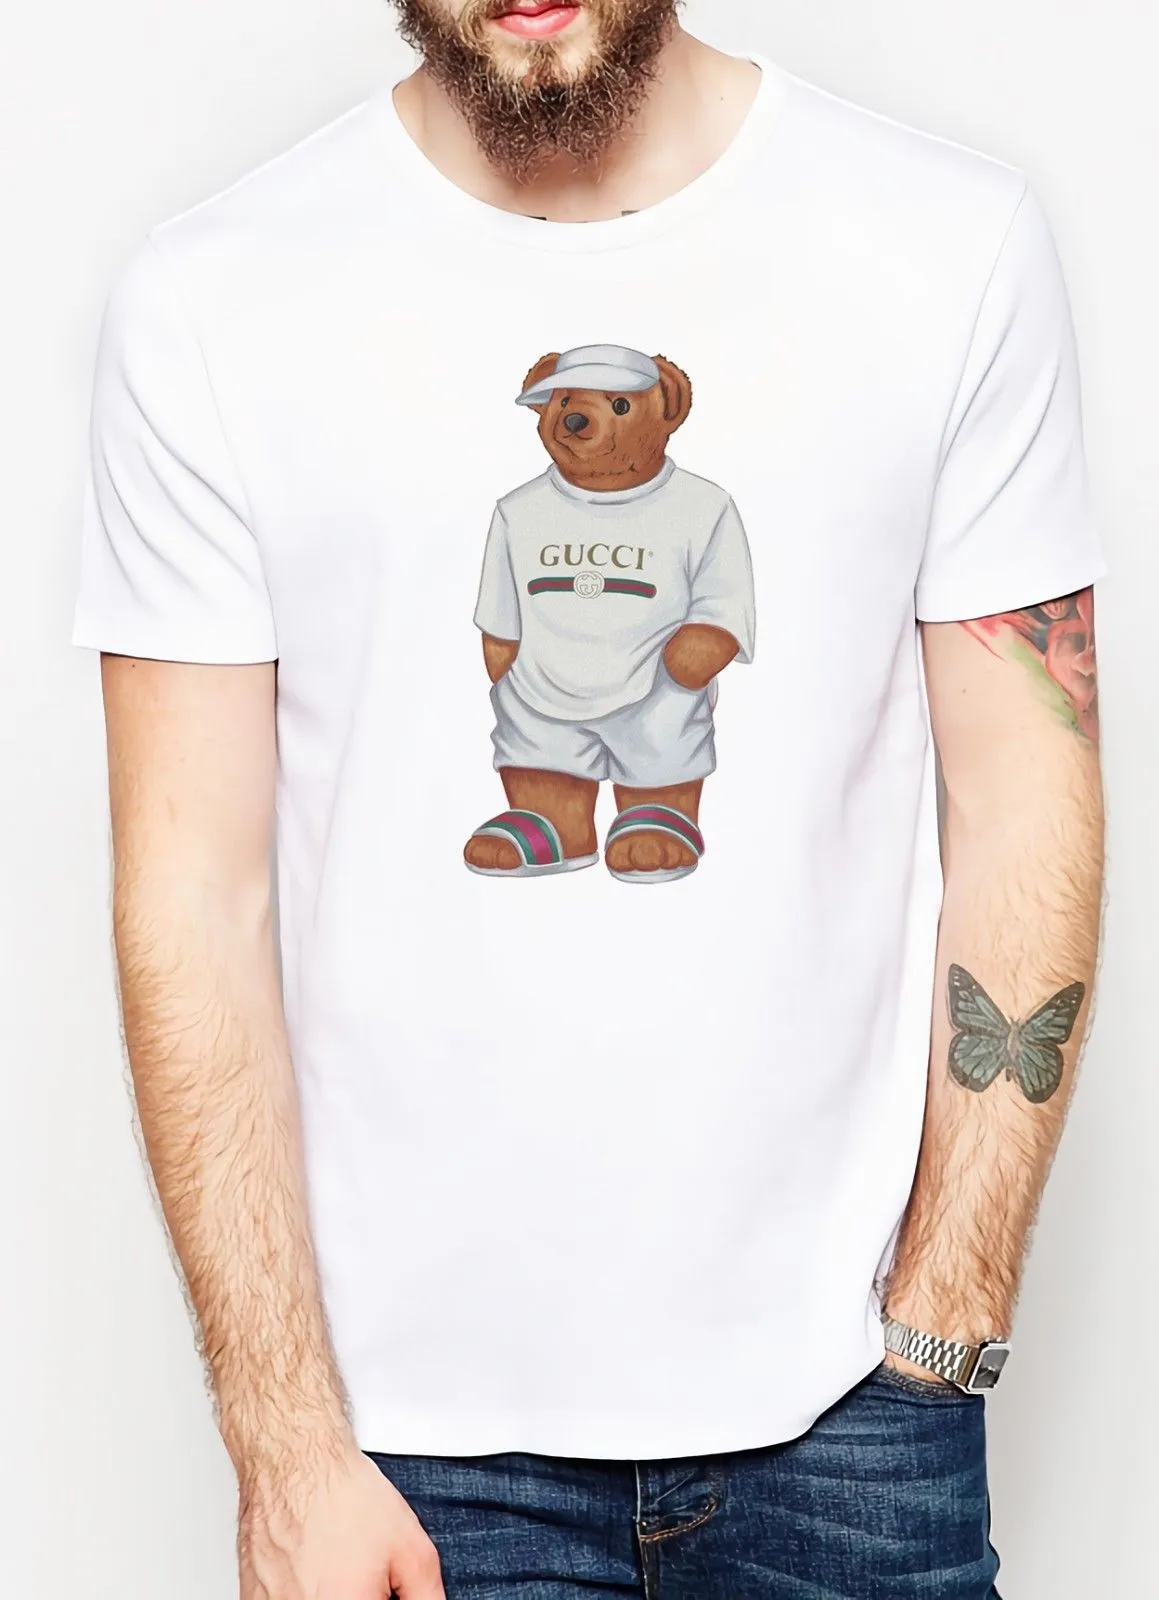 Mike The Bear Life Is Shirt White Casual Summer Short Sleeve T Shirt S Xxxl 2018 Short Sleeve Cotton T Shirts Man Clothing From Baylinestore, $24.2 | DHgate.Com